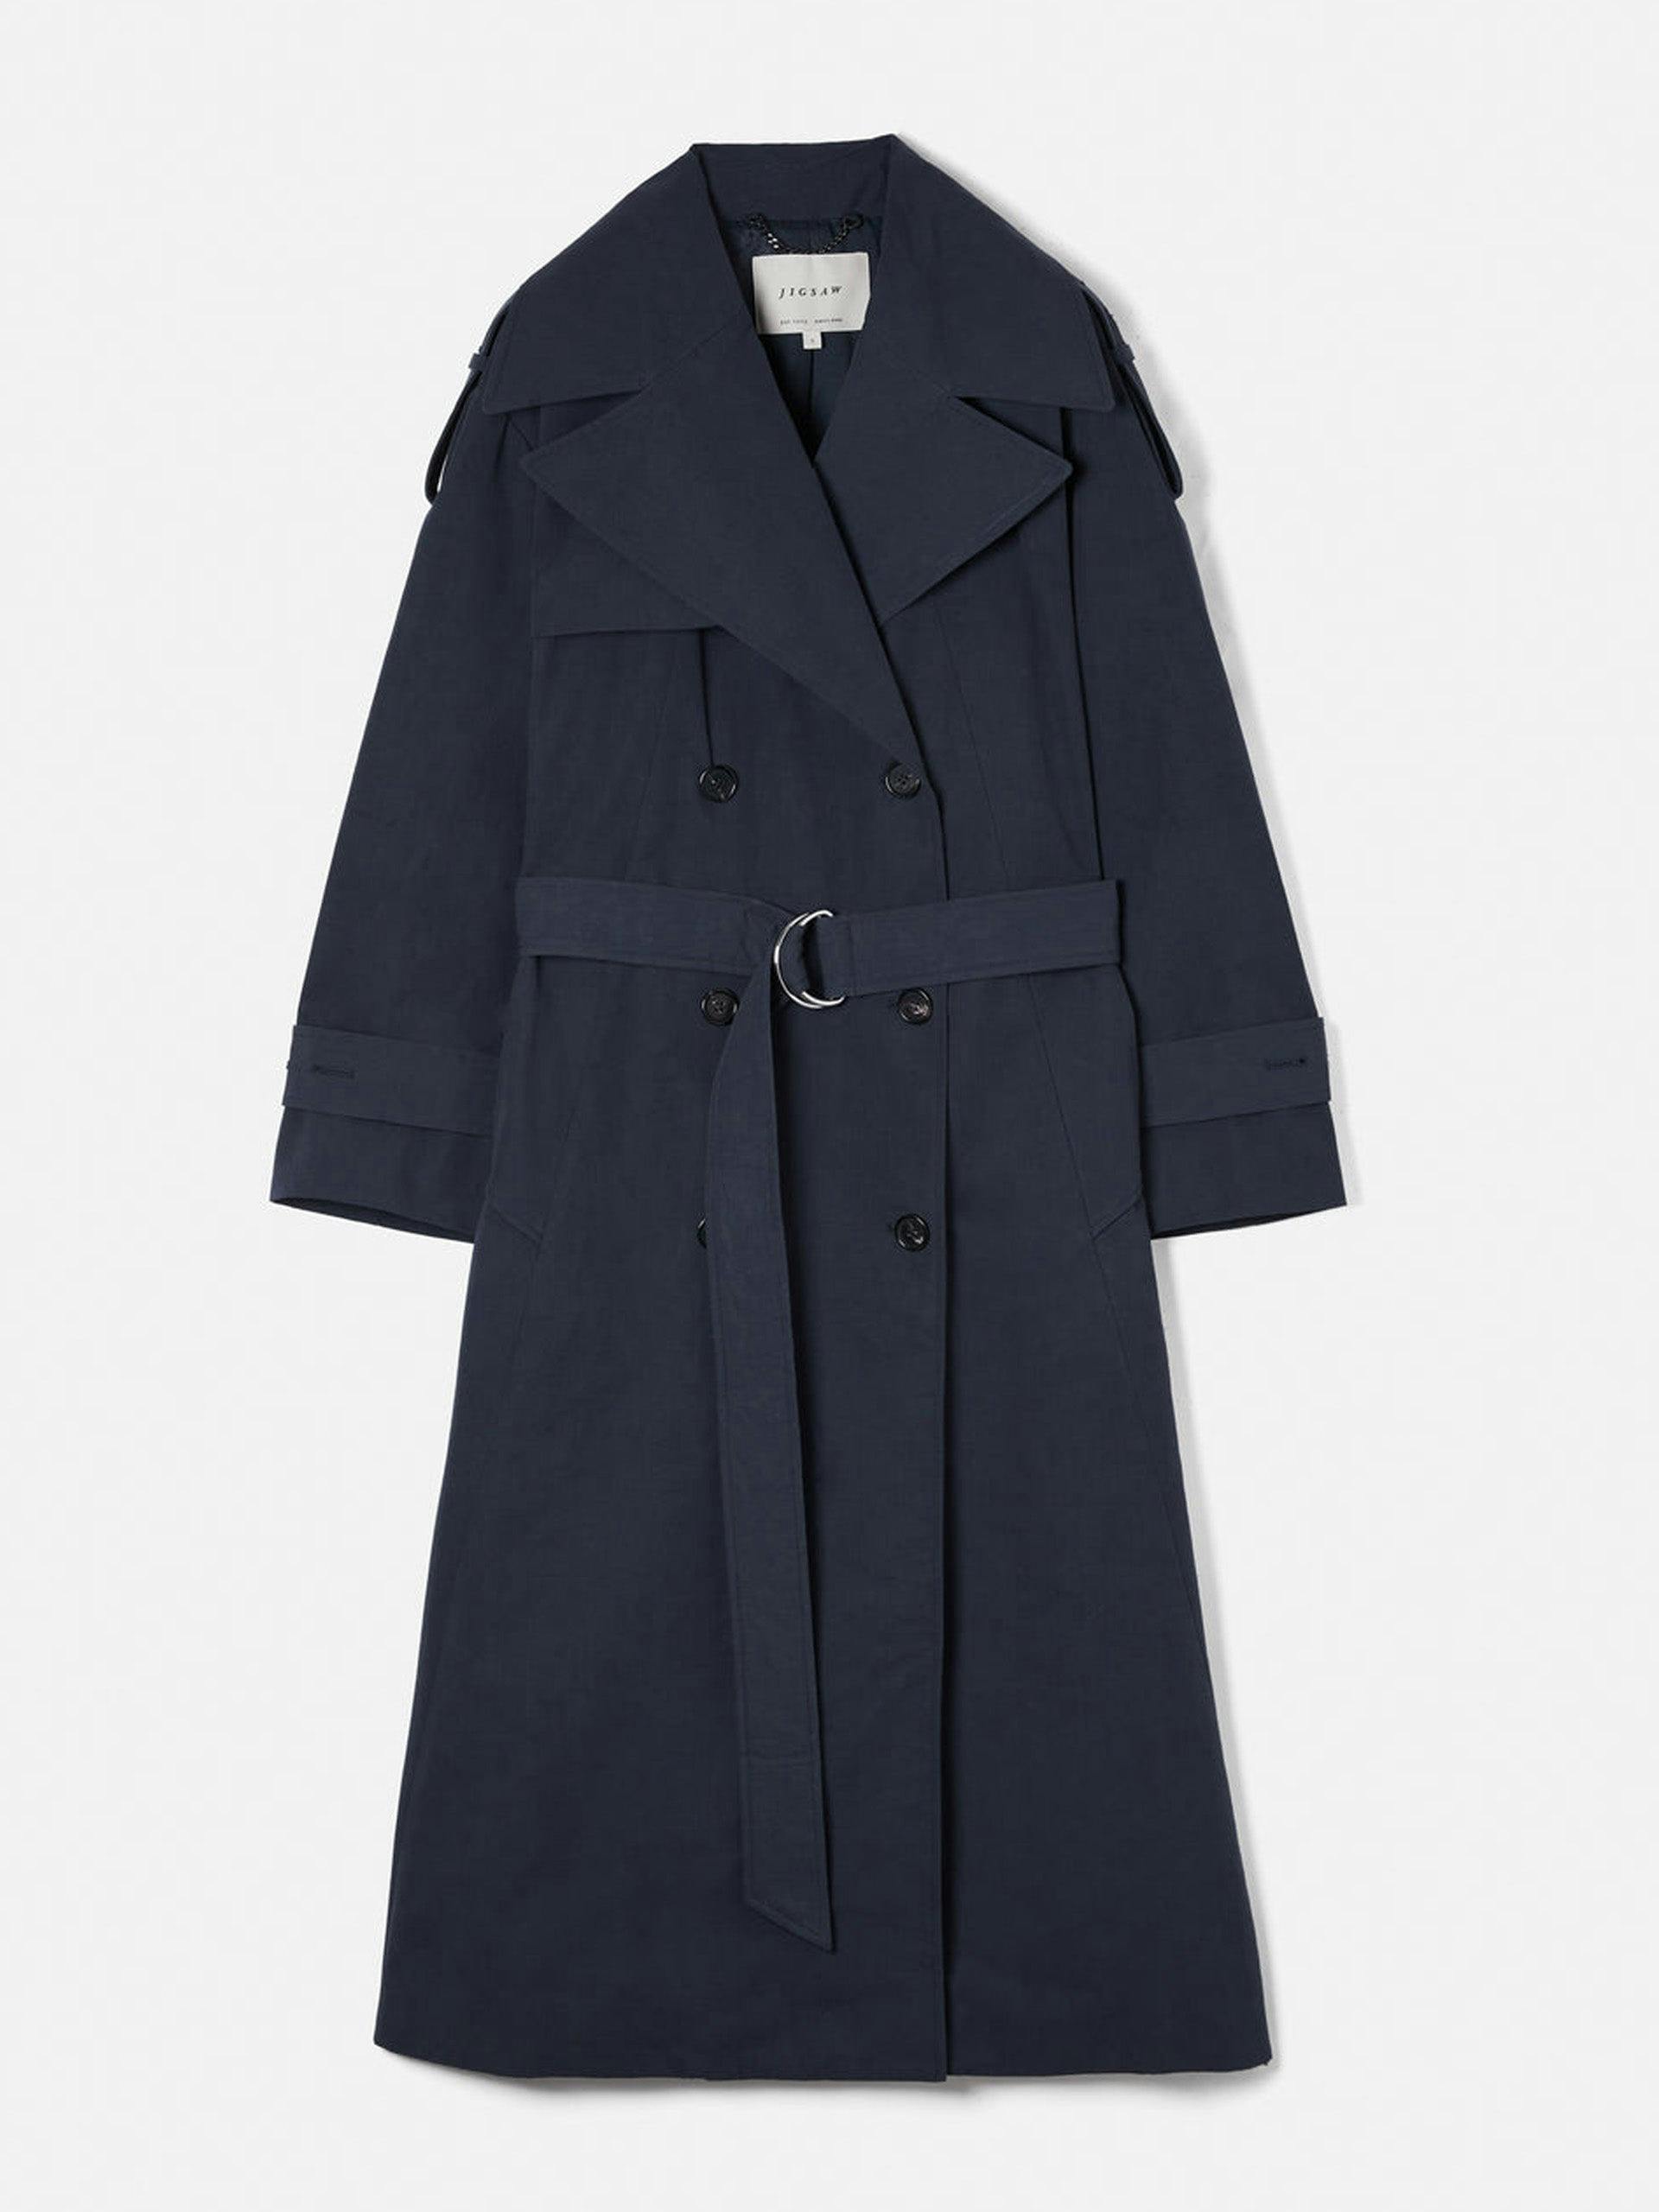 Nelson cotton trench coat